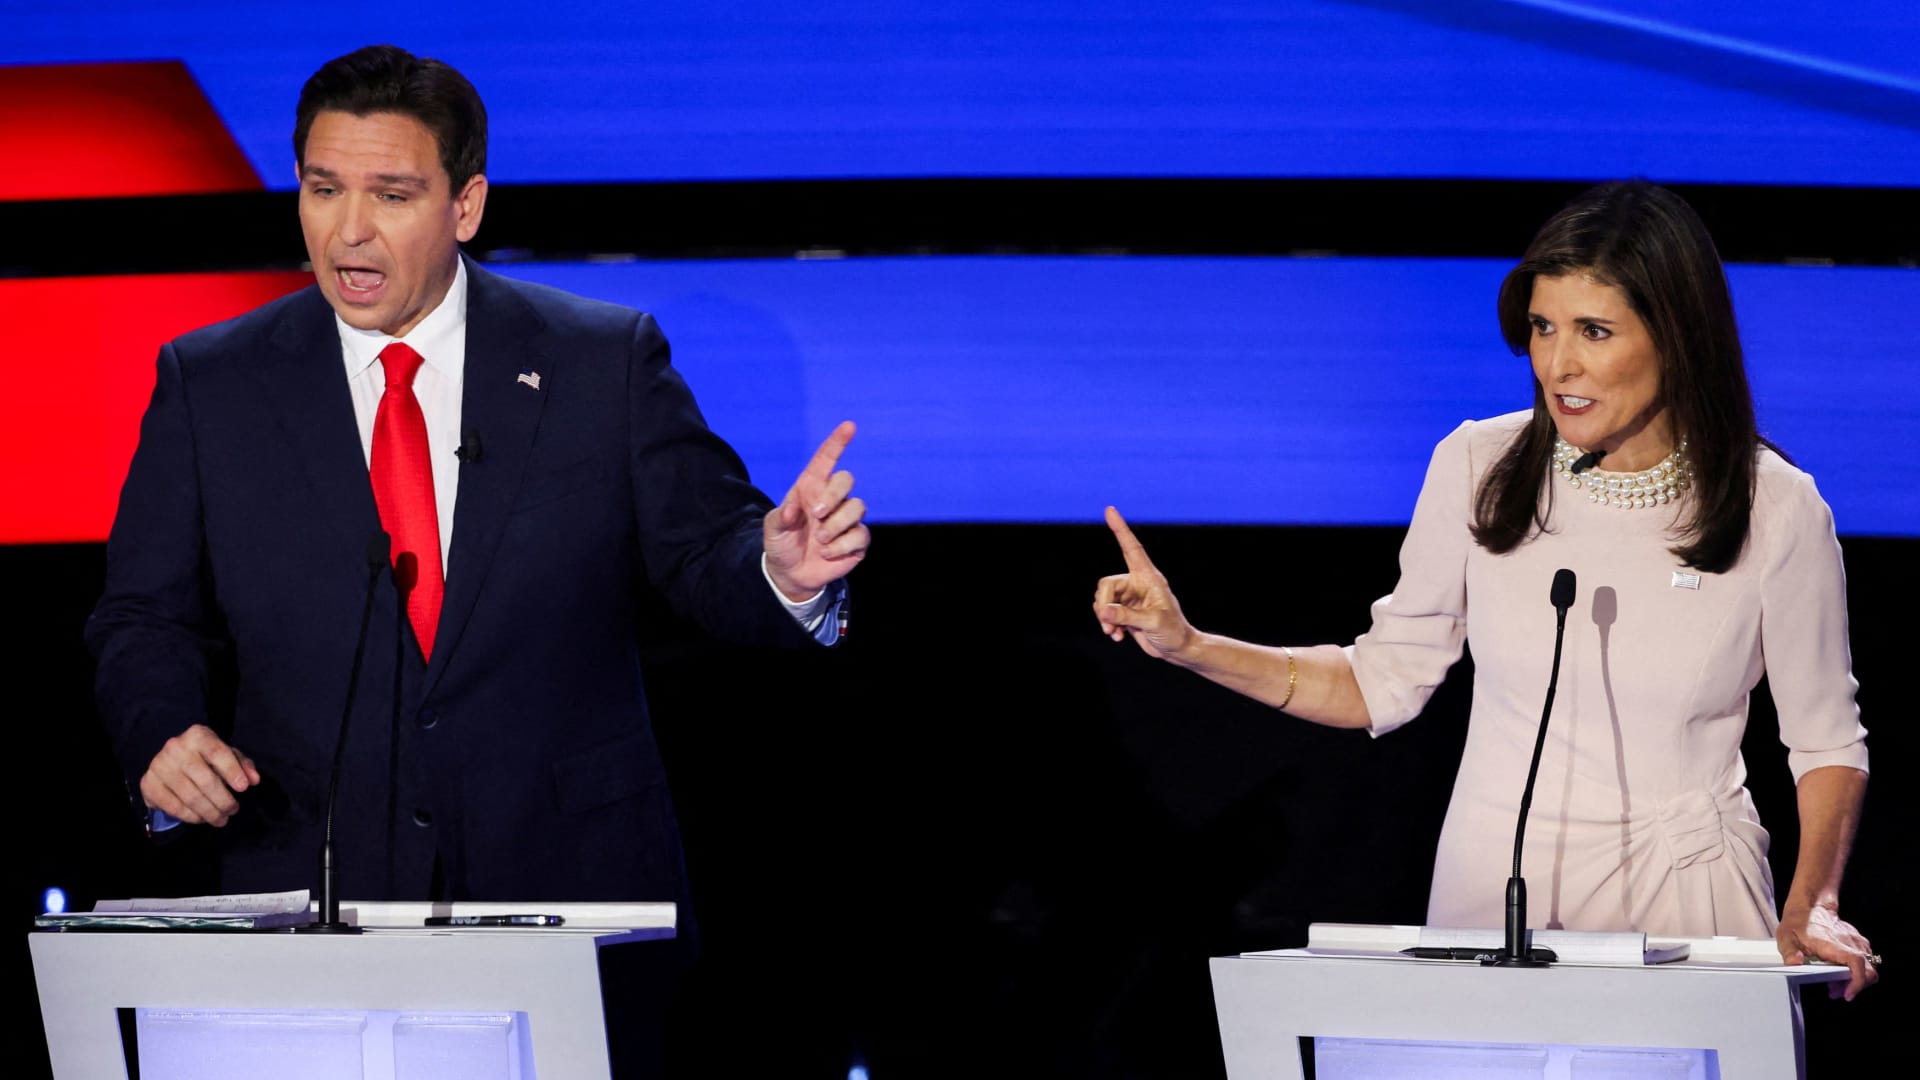 Florida Gov. Ron DeSantis and former U.S. Ambassador to the United Nations Nikki Haley participate in the Republican presidential debate hosted by CNN at Drake University in Des Moines, Iowa, on Jan. 10, 2024.